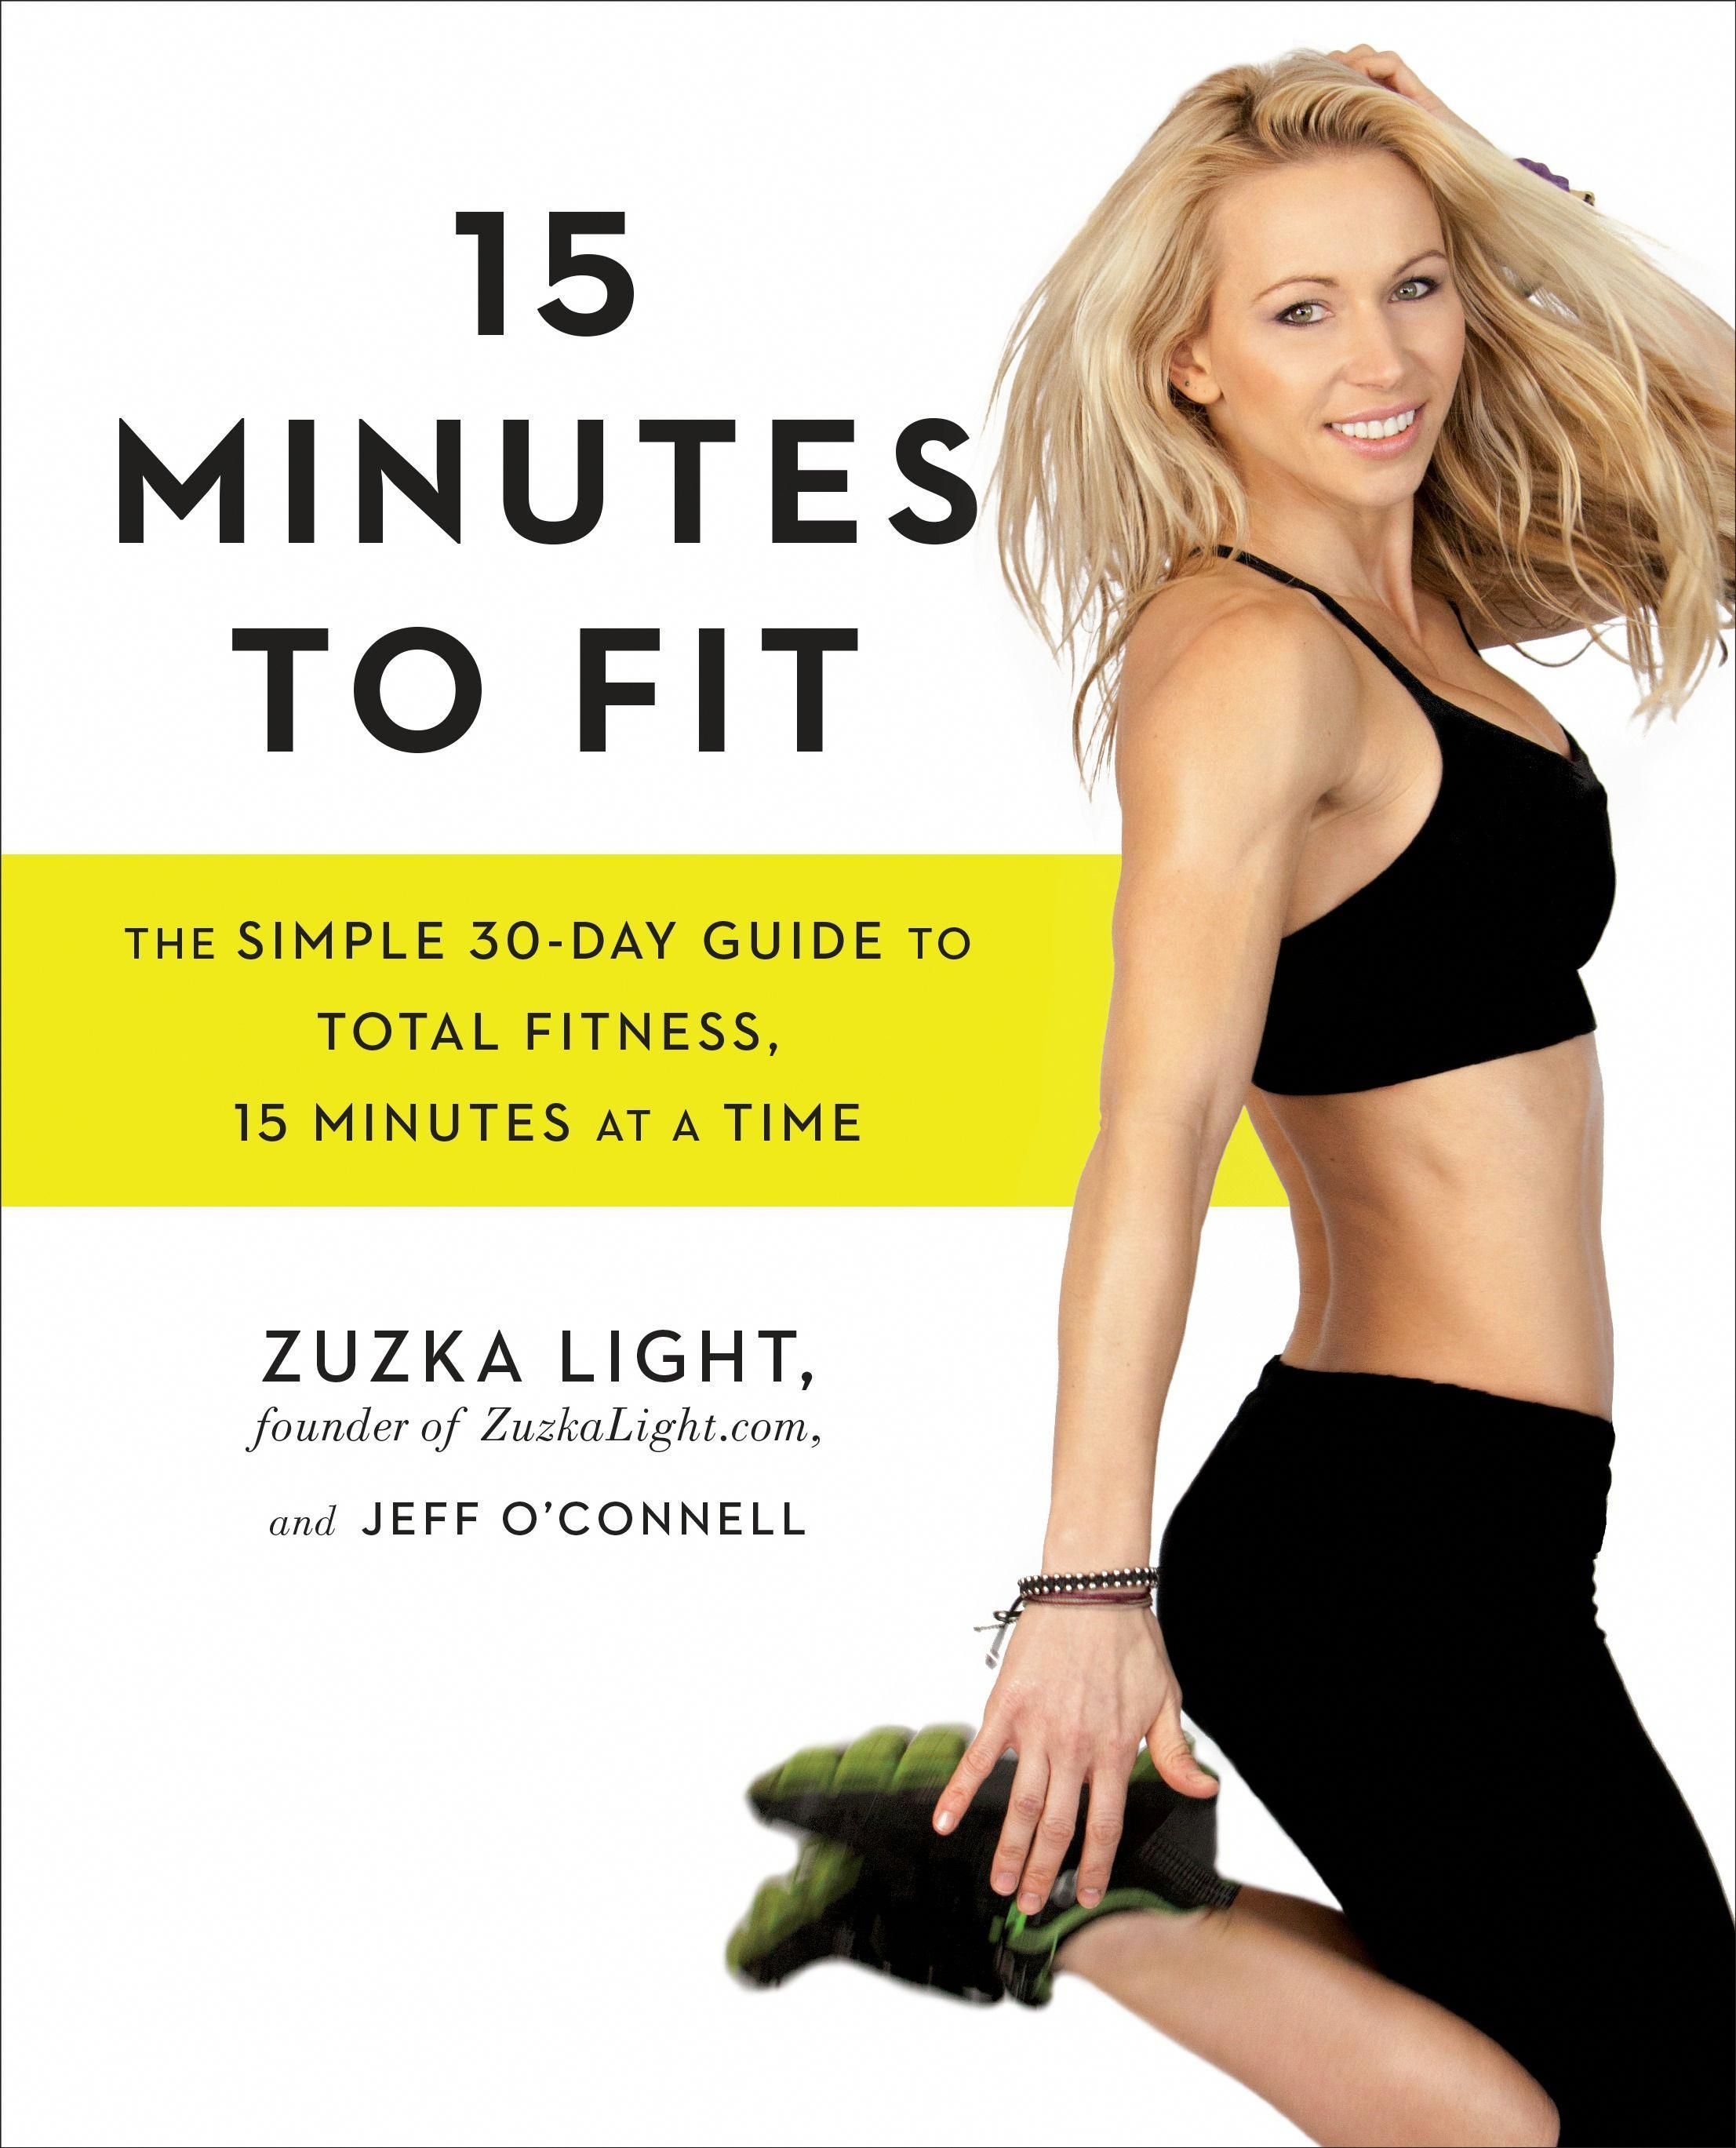 15 Minutes to Fit by Zuzka Light, Jeff O'Connell: 9781583335826 | PenguinRandomHouse.com: Books - 15 Minutes to Fit by Zuzka Light, Jeff O'Connell: 9781583335826 | PenguinRandomHouse.com: Books -   17 fitness Challenge women ideas